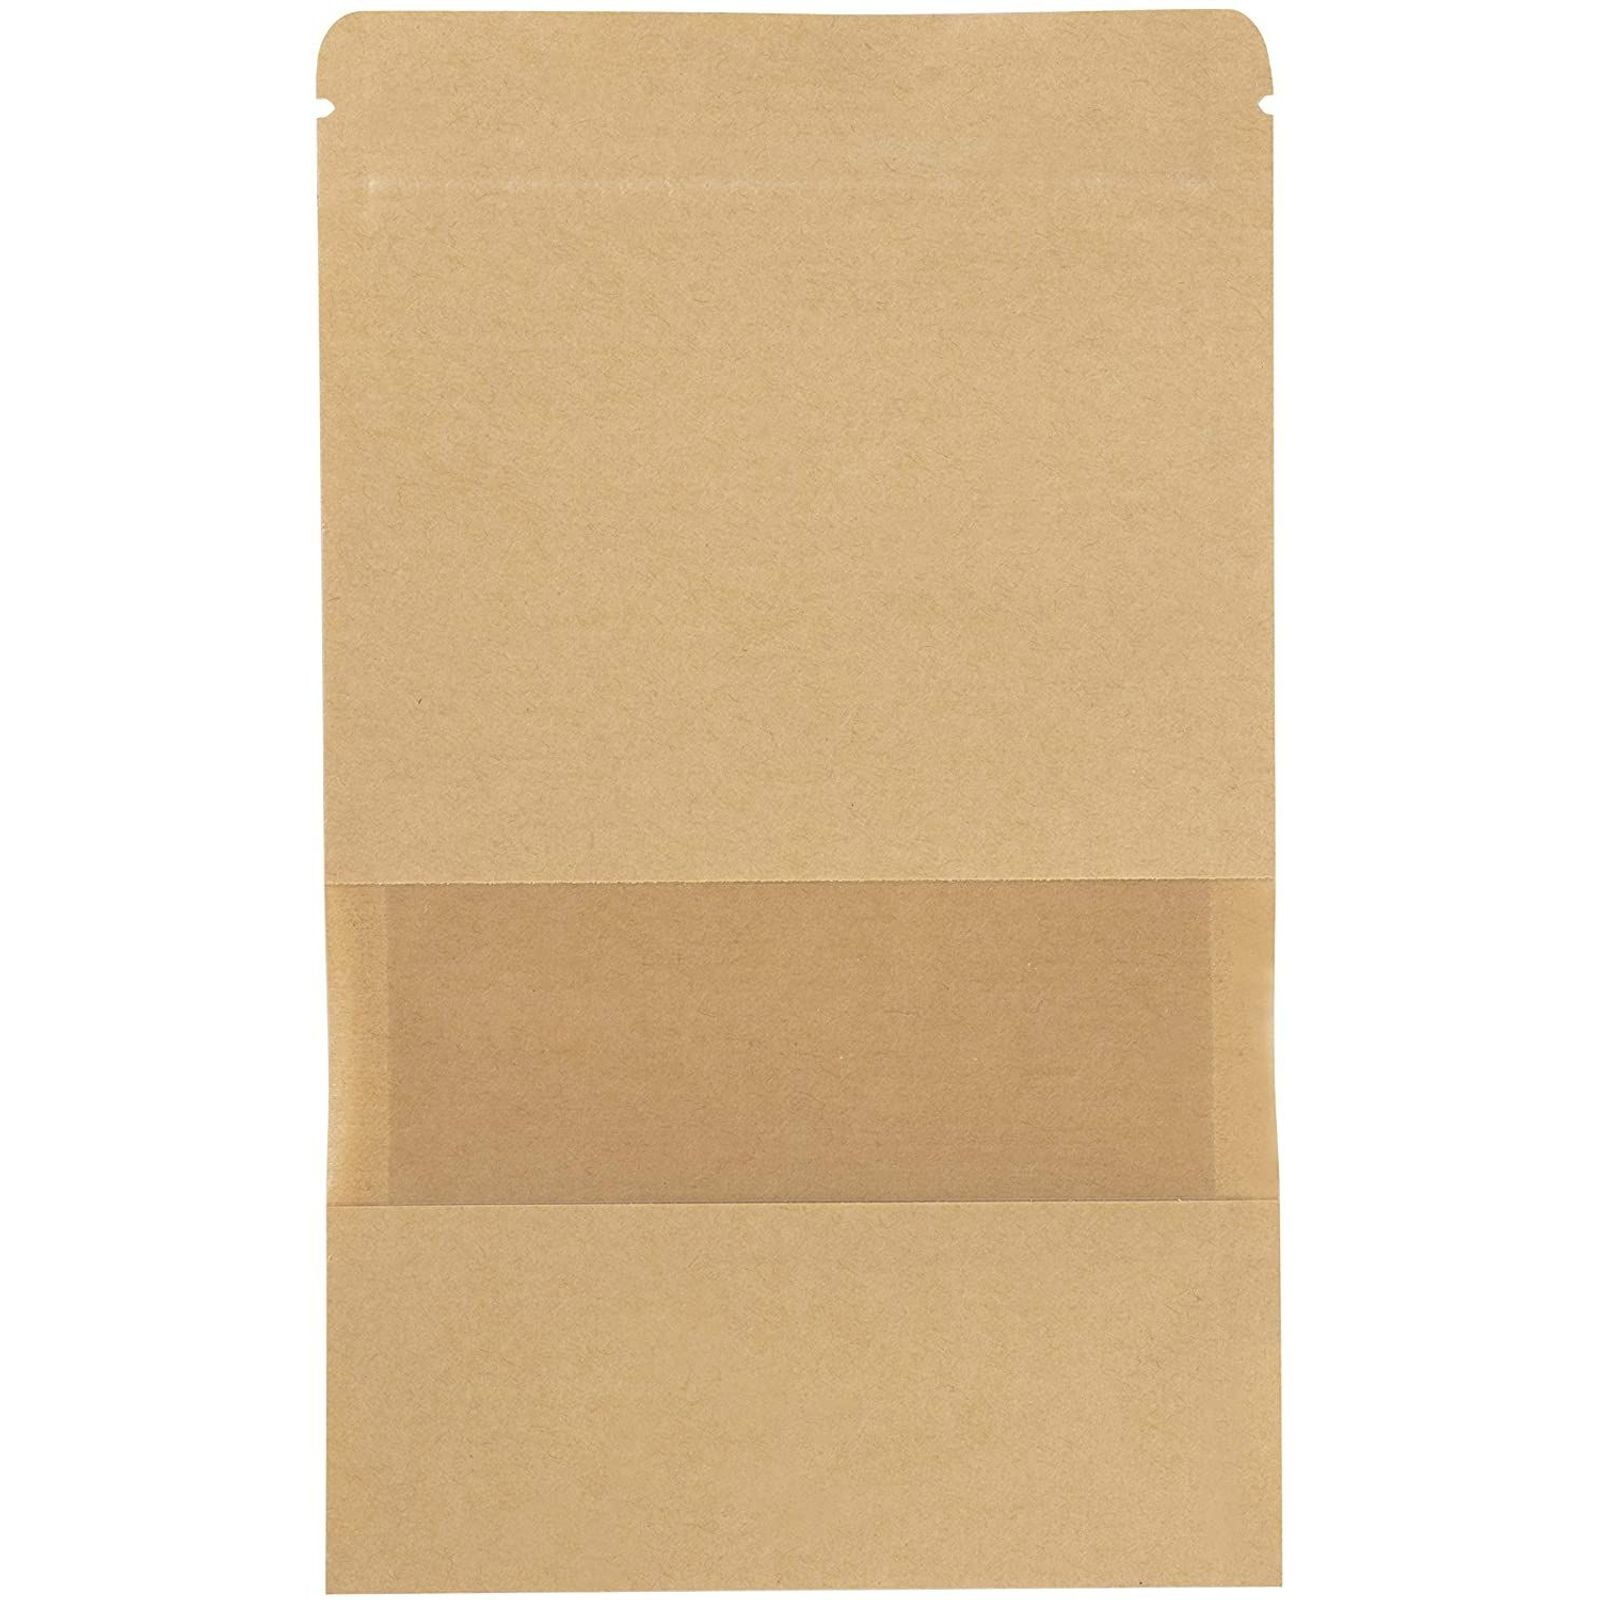 6.3 x 8.6 Inches 50-Pack Resealable Paper Pouch 5.7-Ounce Capacity with Transparent Matte Window and Tear Notch Reusable Sealing Bag Kraft Zip Lock Stand-up Bag 